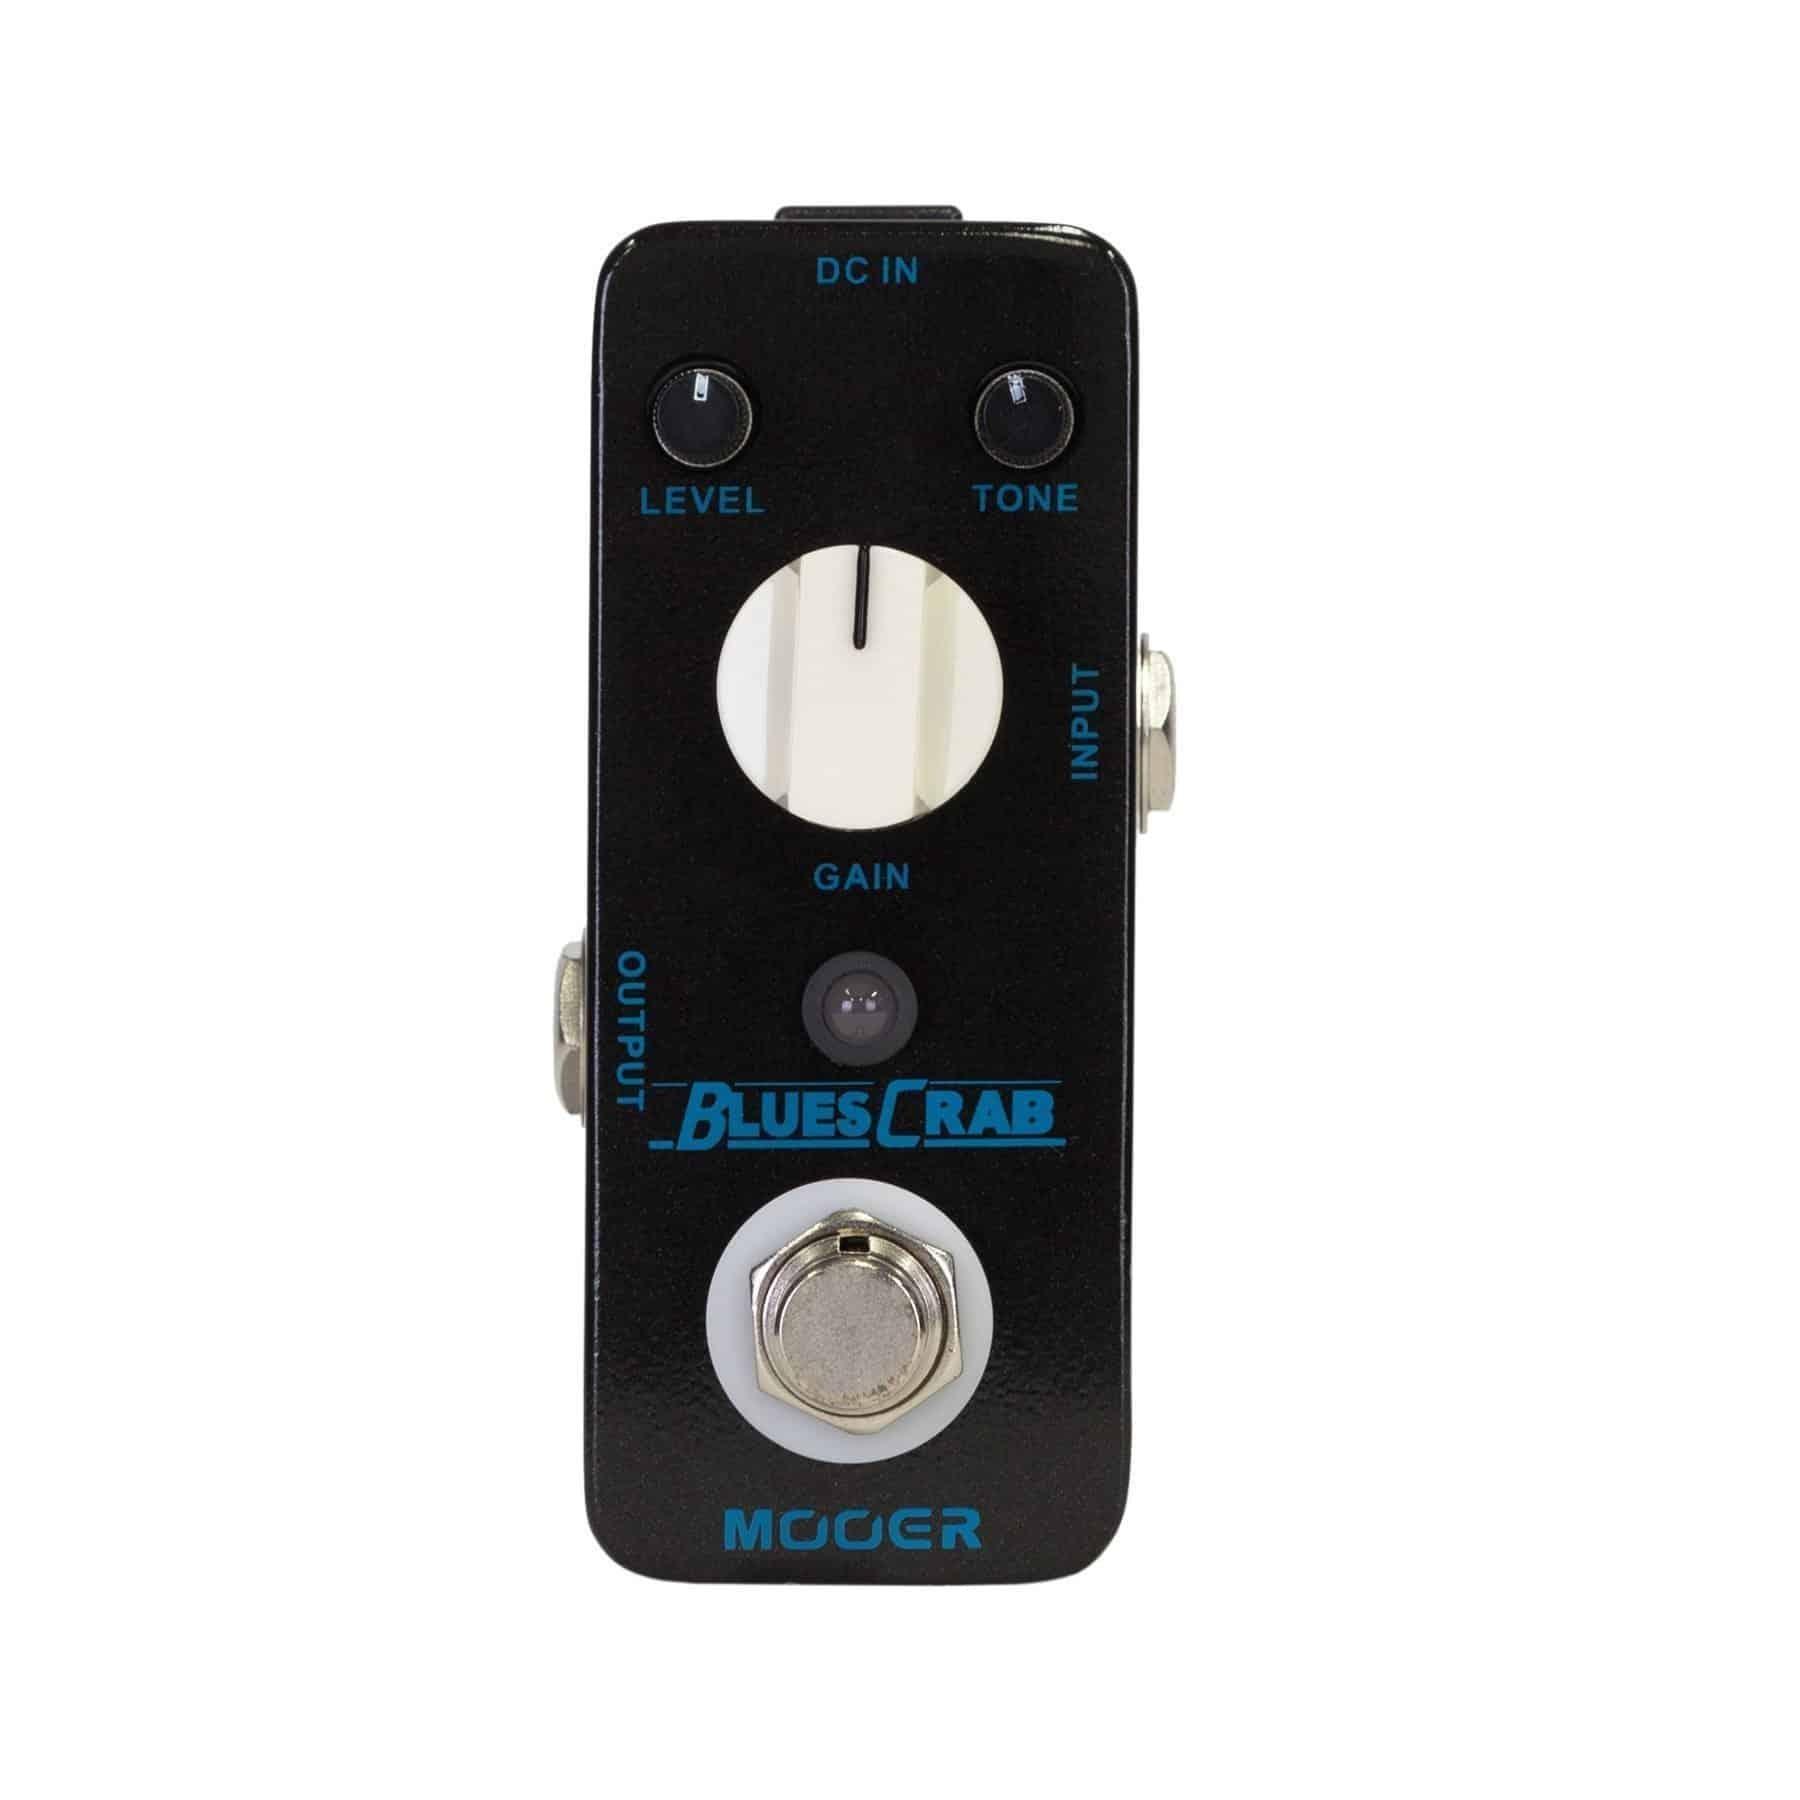 Mooer Blues Crab Classic Blues Overdrive Micro Guitar Effects Pedal - Guitar - Effects Pedals by Mooer at Muso's Stuff